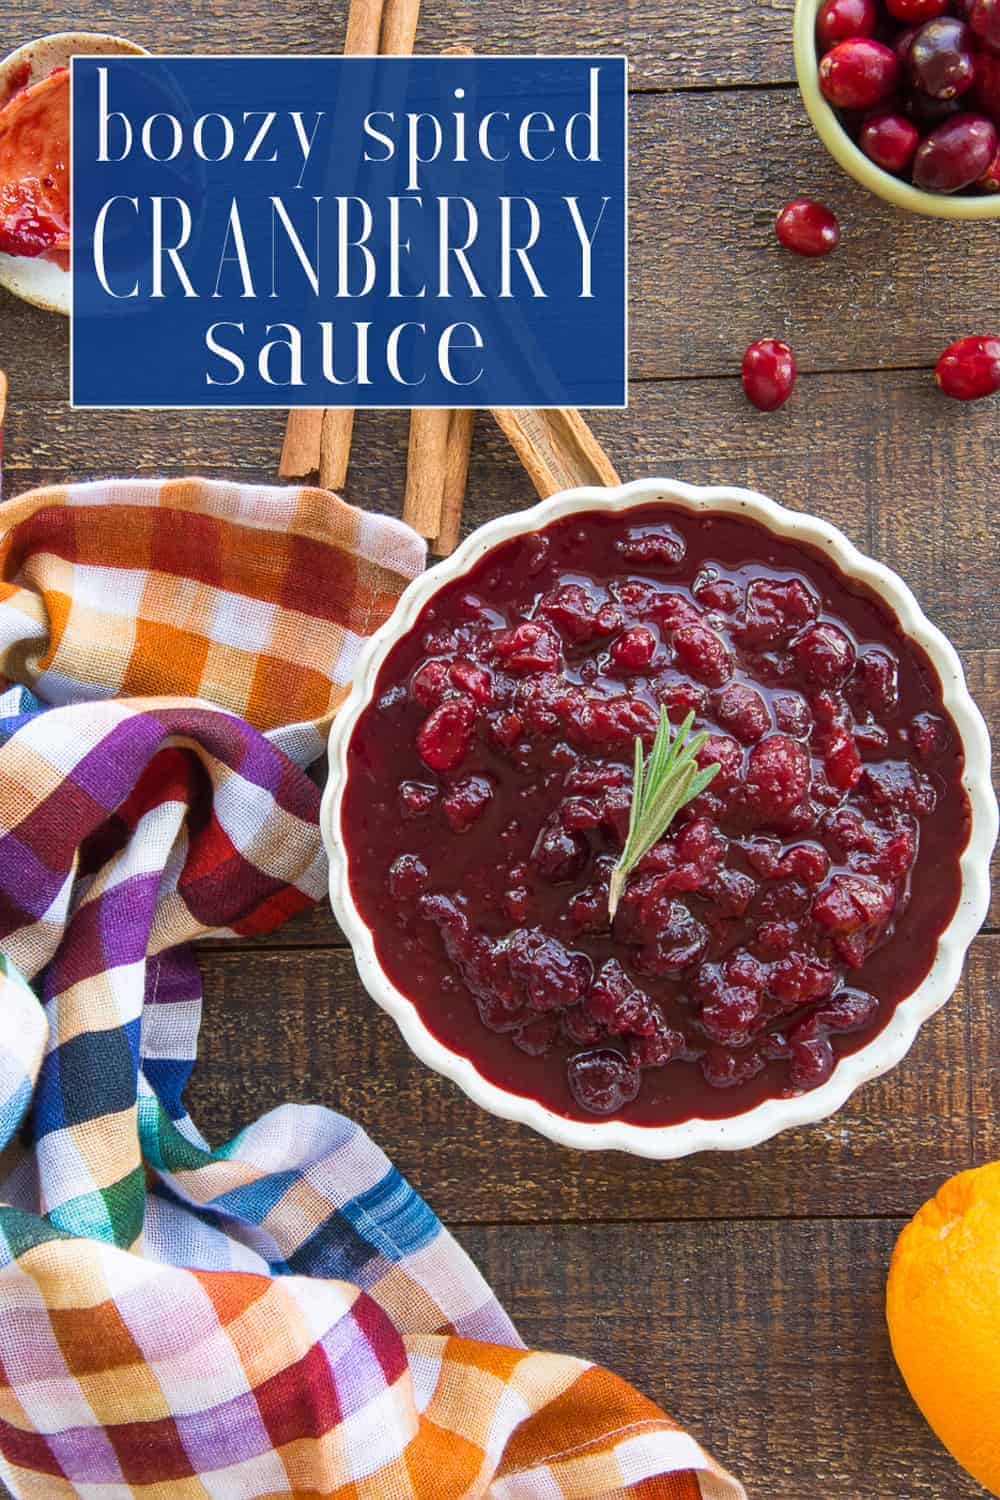 Boozy Spiced Cranberry Sauce is so easy to make, but the flavor makes you and your guests think you've spent hours making it. Made with all natural ingredients, it tastes better the further ahead you make it. It's the best recipe to serve alongside all of your holiday dishes. #cranberrysauce #homemadecranberrysauce #cranberry #cranberries #cookingwithbourbon #bourbon #cooking #holidayrecipe #makeaheadrecipe #Thanksgivingrecipe #Christmasrecipe via @ediblesense